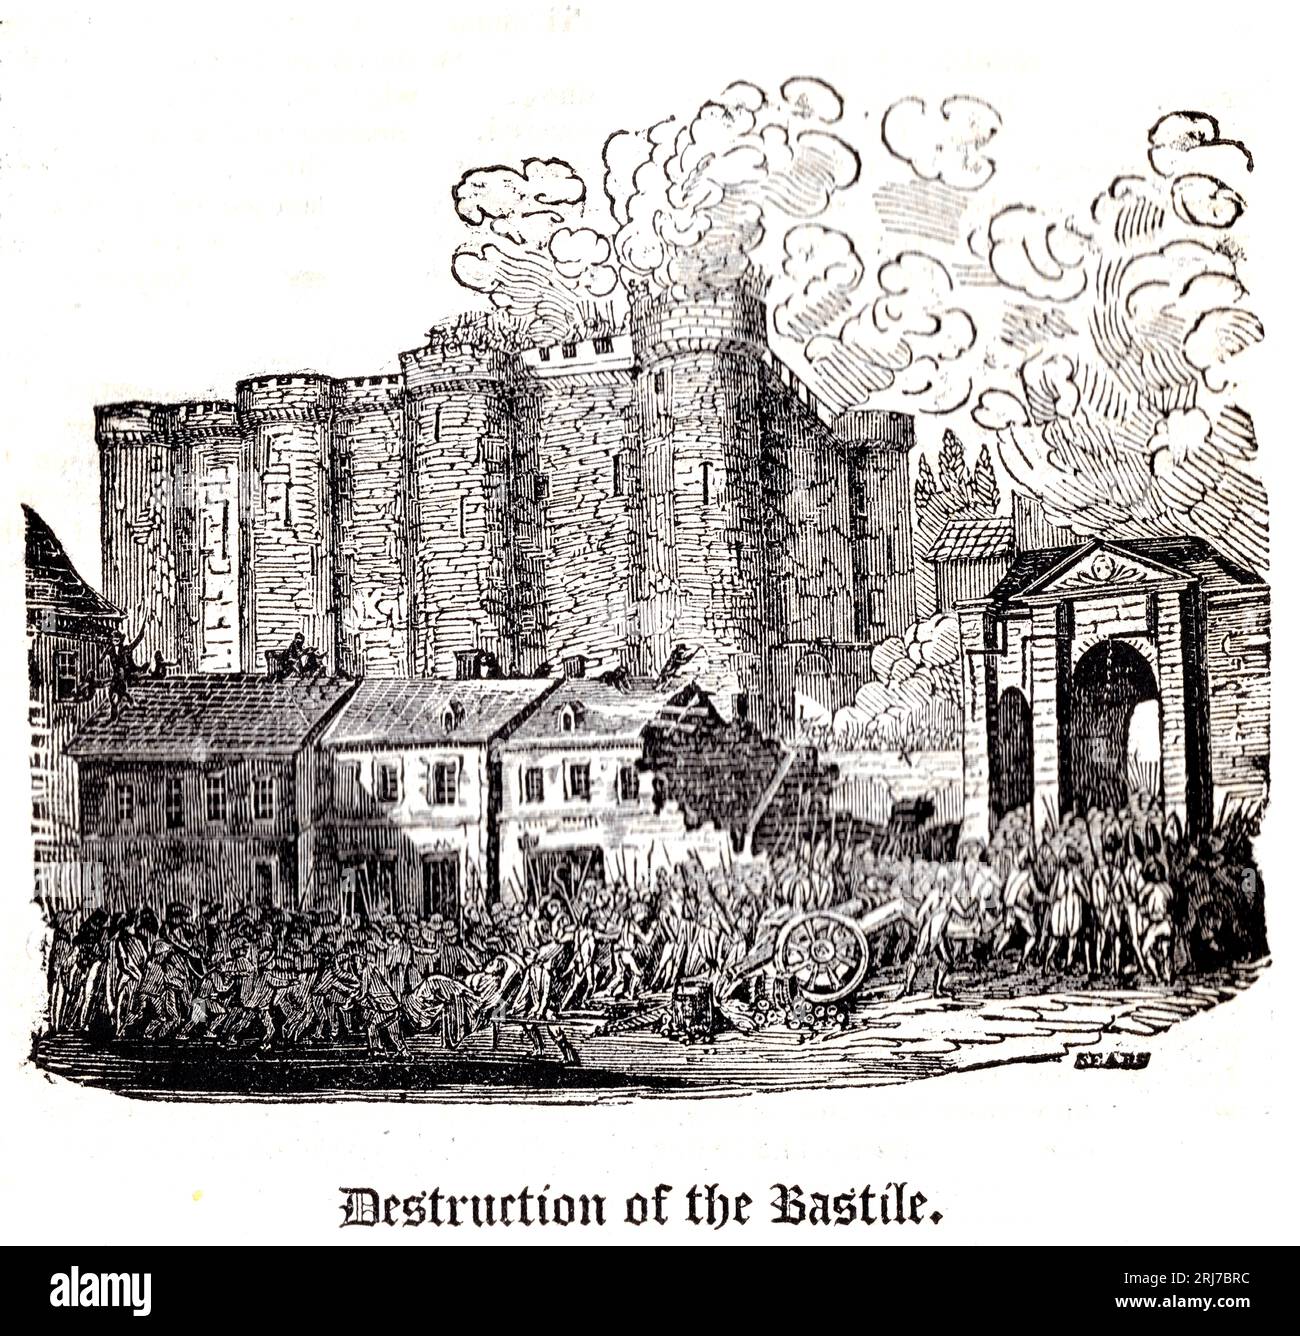 The Every-Day Book, William Hone (London, 1826) p.826 - Destruction Of The Bastille - wood engraving by Matthew Urlwin Sears Stock Photo